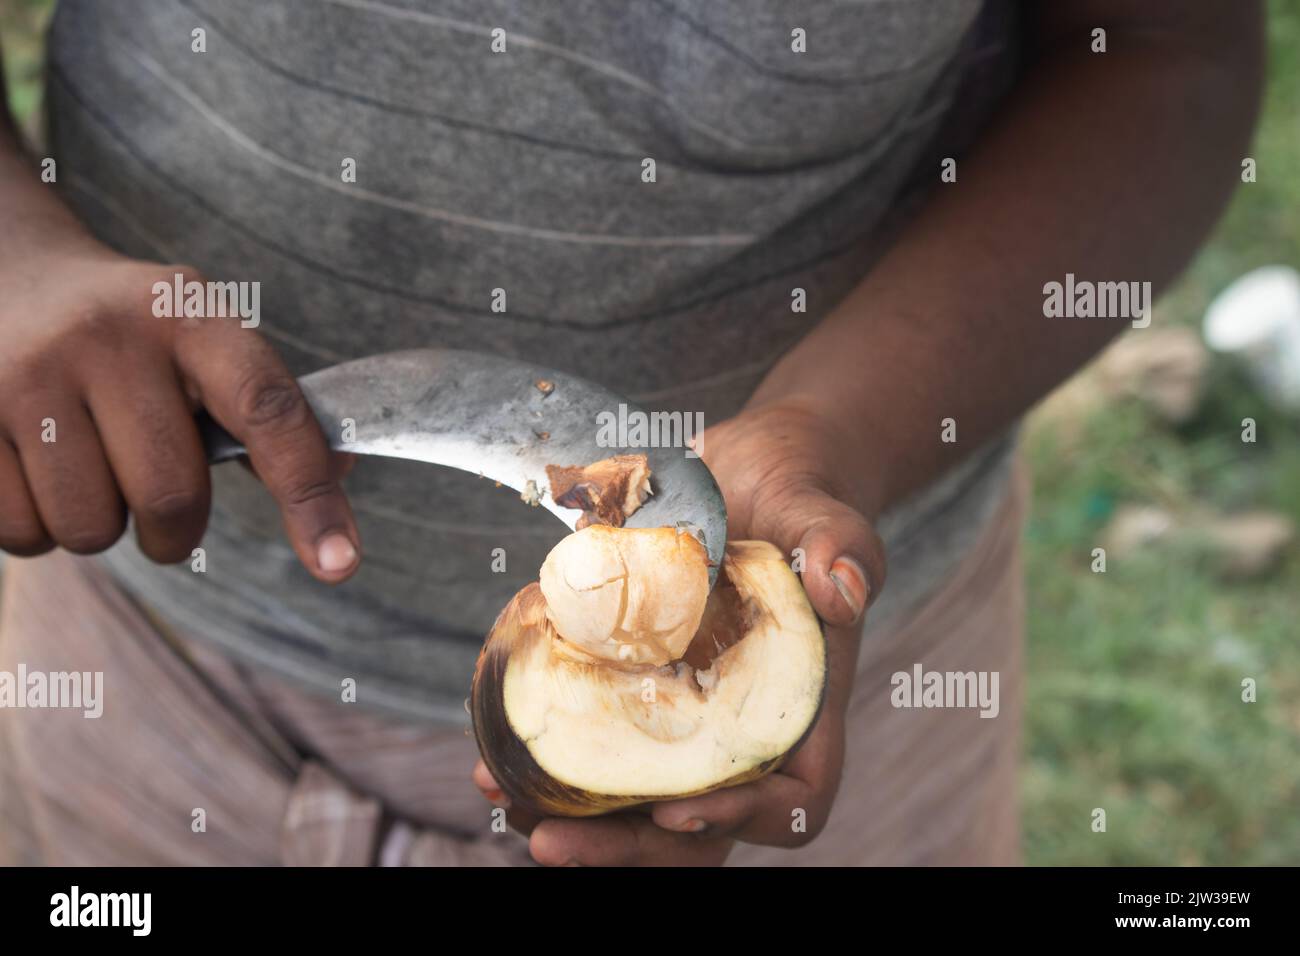 Hand Holding Cutting Or Peeling Fresh Indian Ice Apple A Palm Fruit Also Called Nungu, Pananungu Or Palmyra Fruit. A Natural Coolant, Juicy Stock Photo